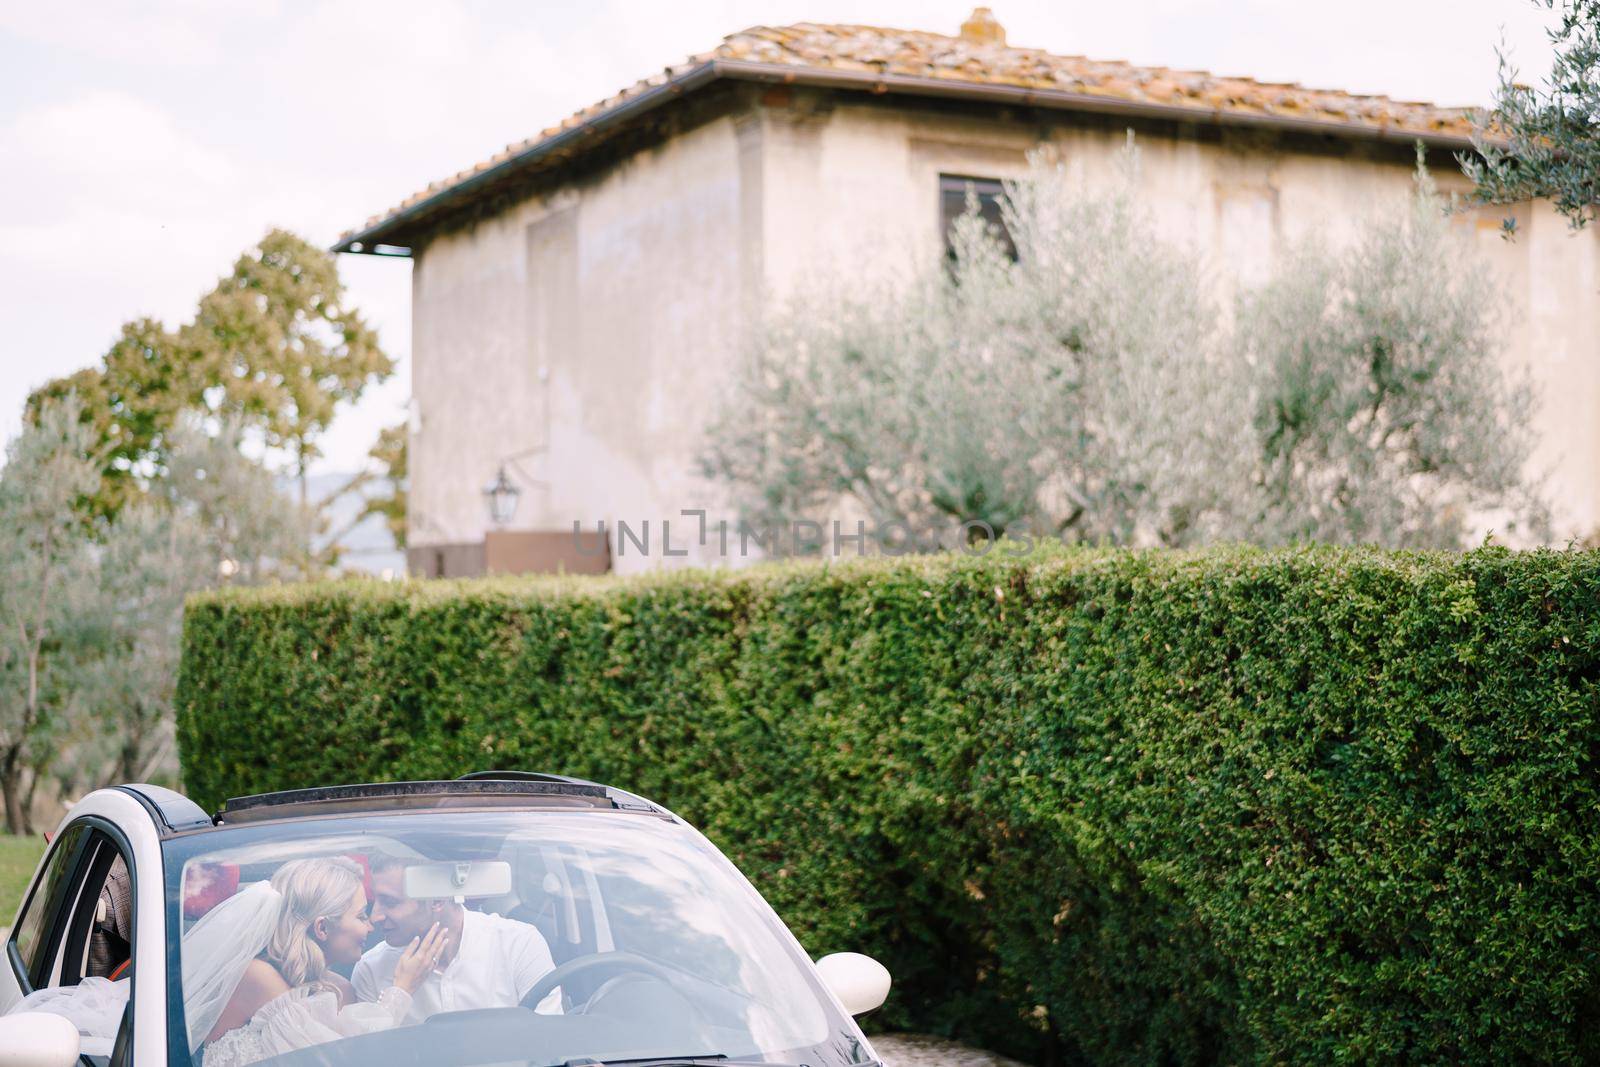 Beautiful bride and groom leaning forehead to forehead in a convertible in front of the old villa in Italy, in Tuscany, near Florence by Nadtochiy